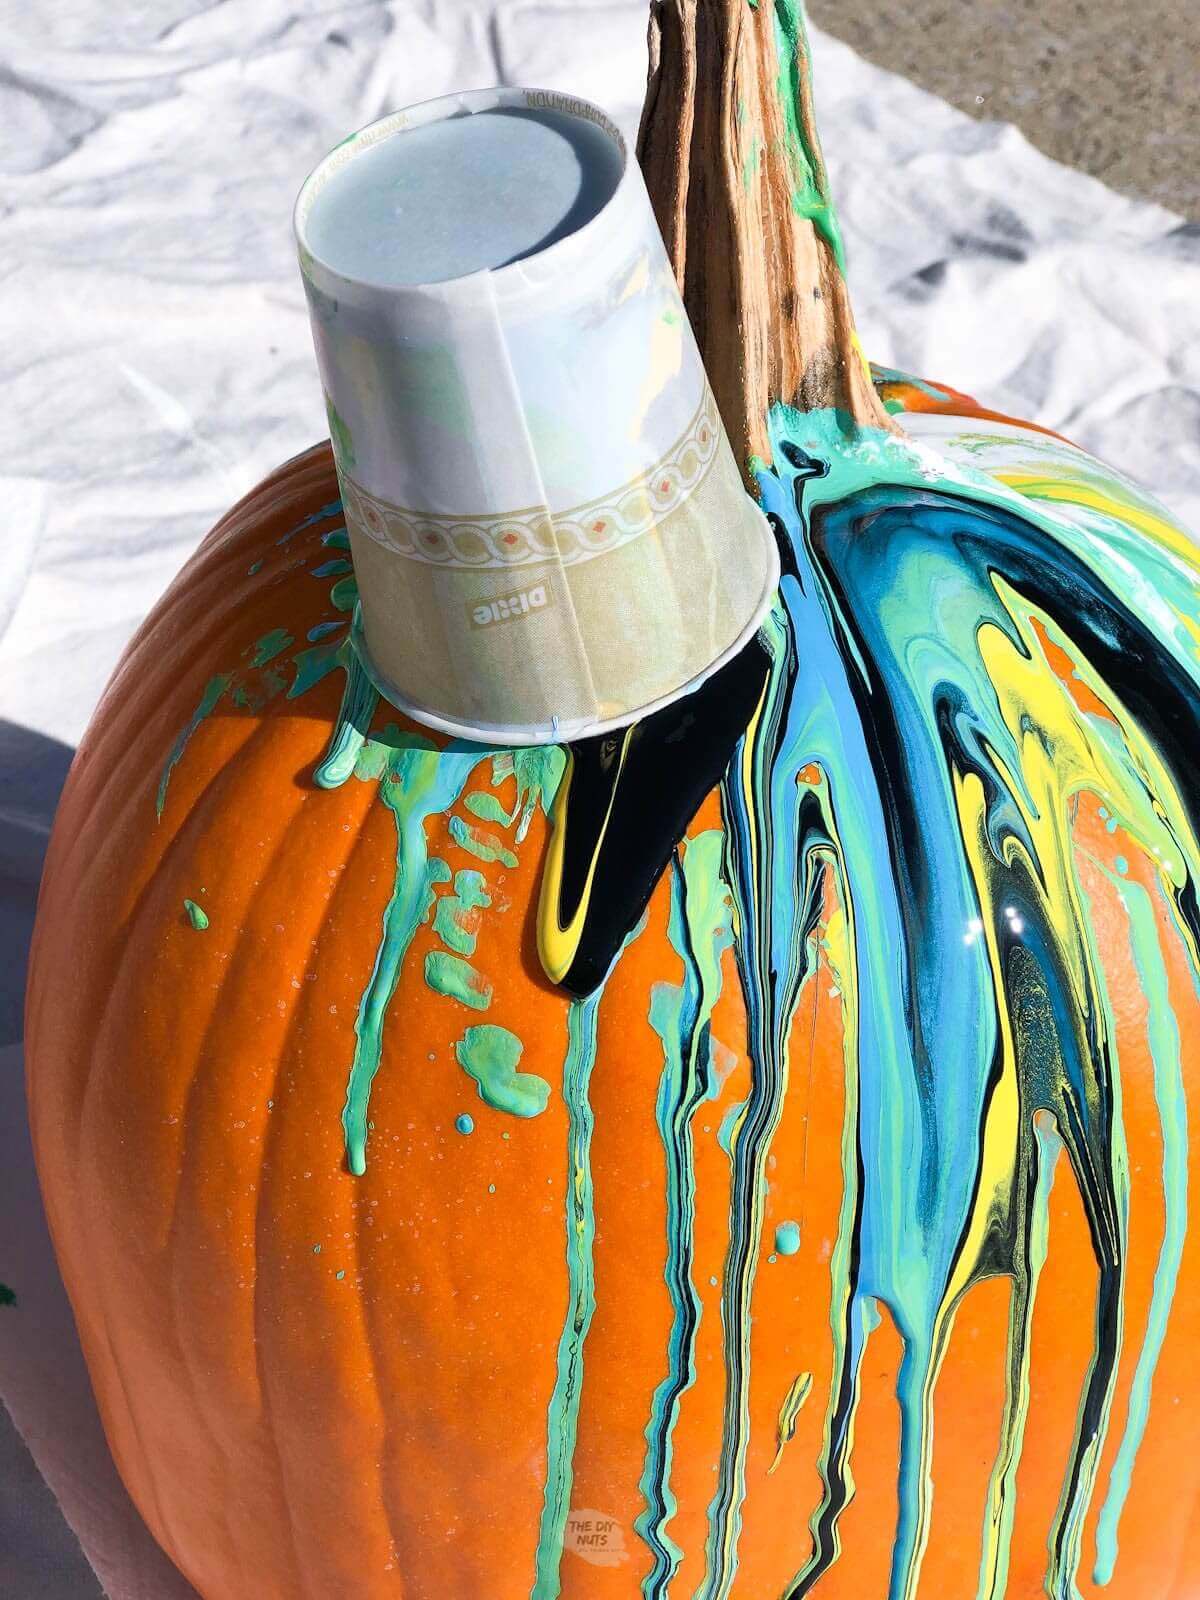 Cup left on pumpkin to pour paint on pumpkin to create a cool DIY painted pumpkin.